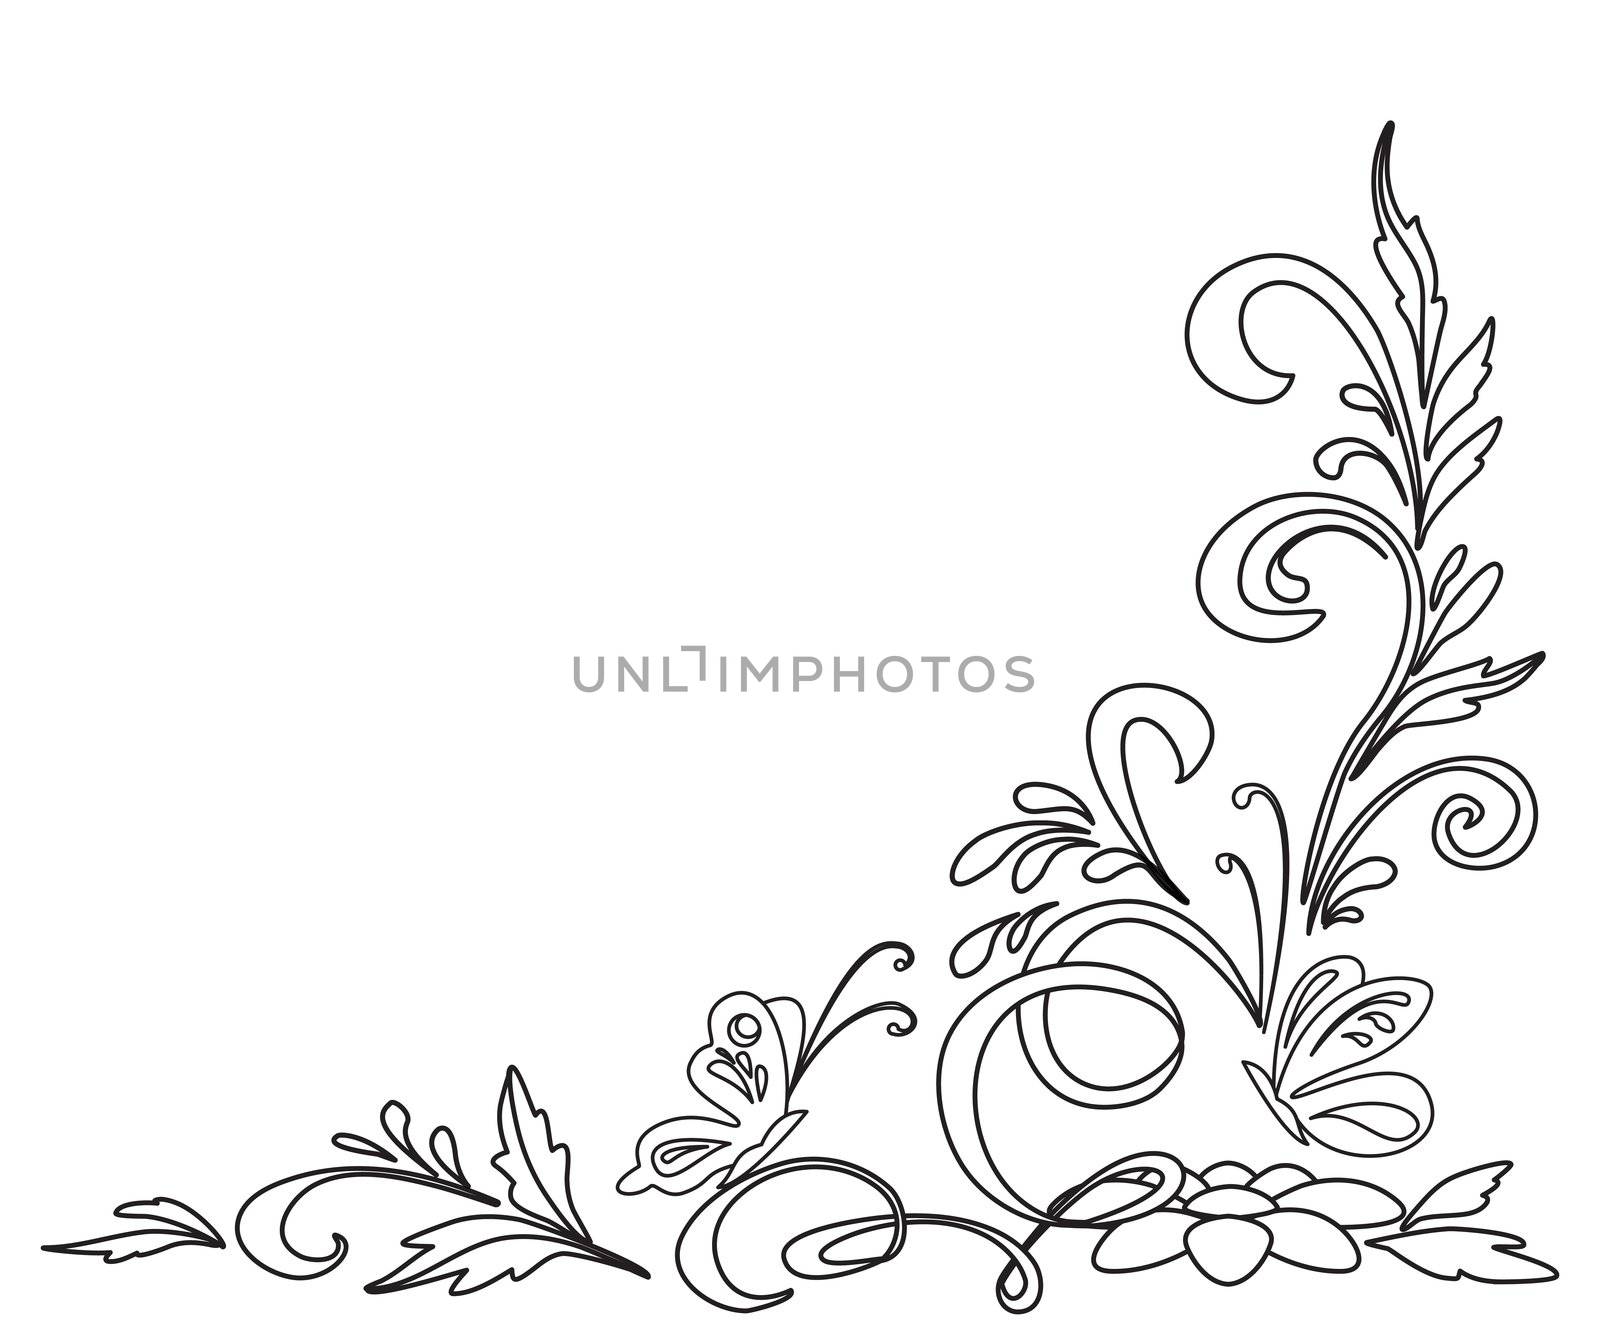 Background, abstract floral pattern, isolated black-and-white contours